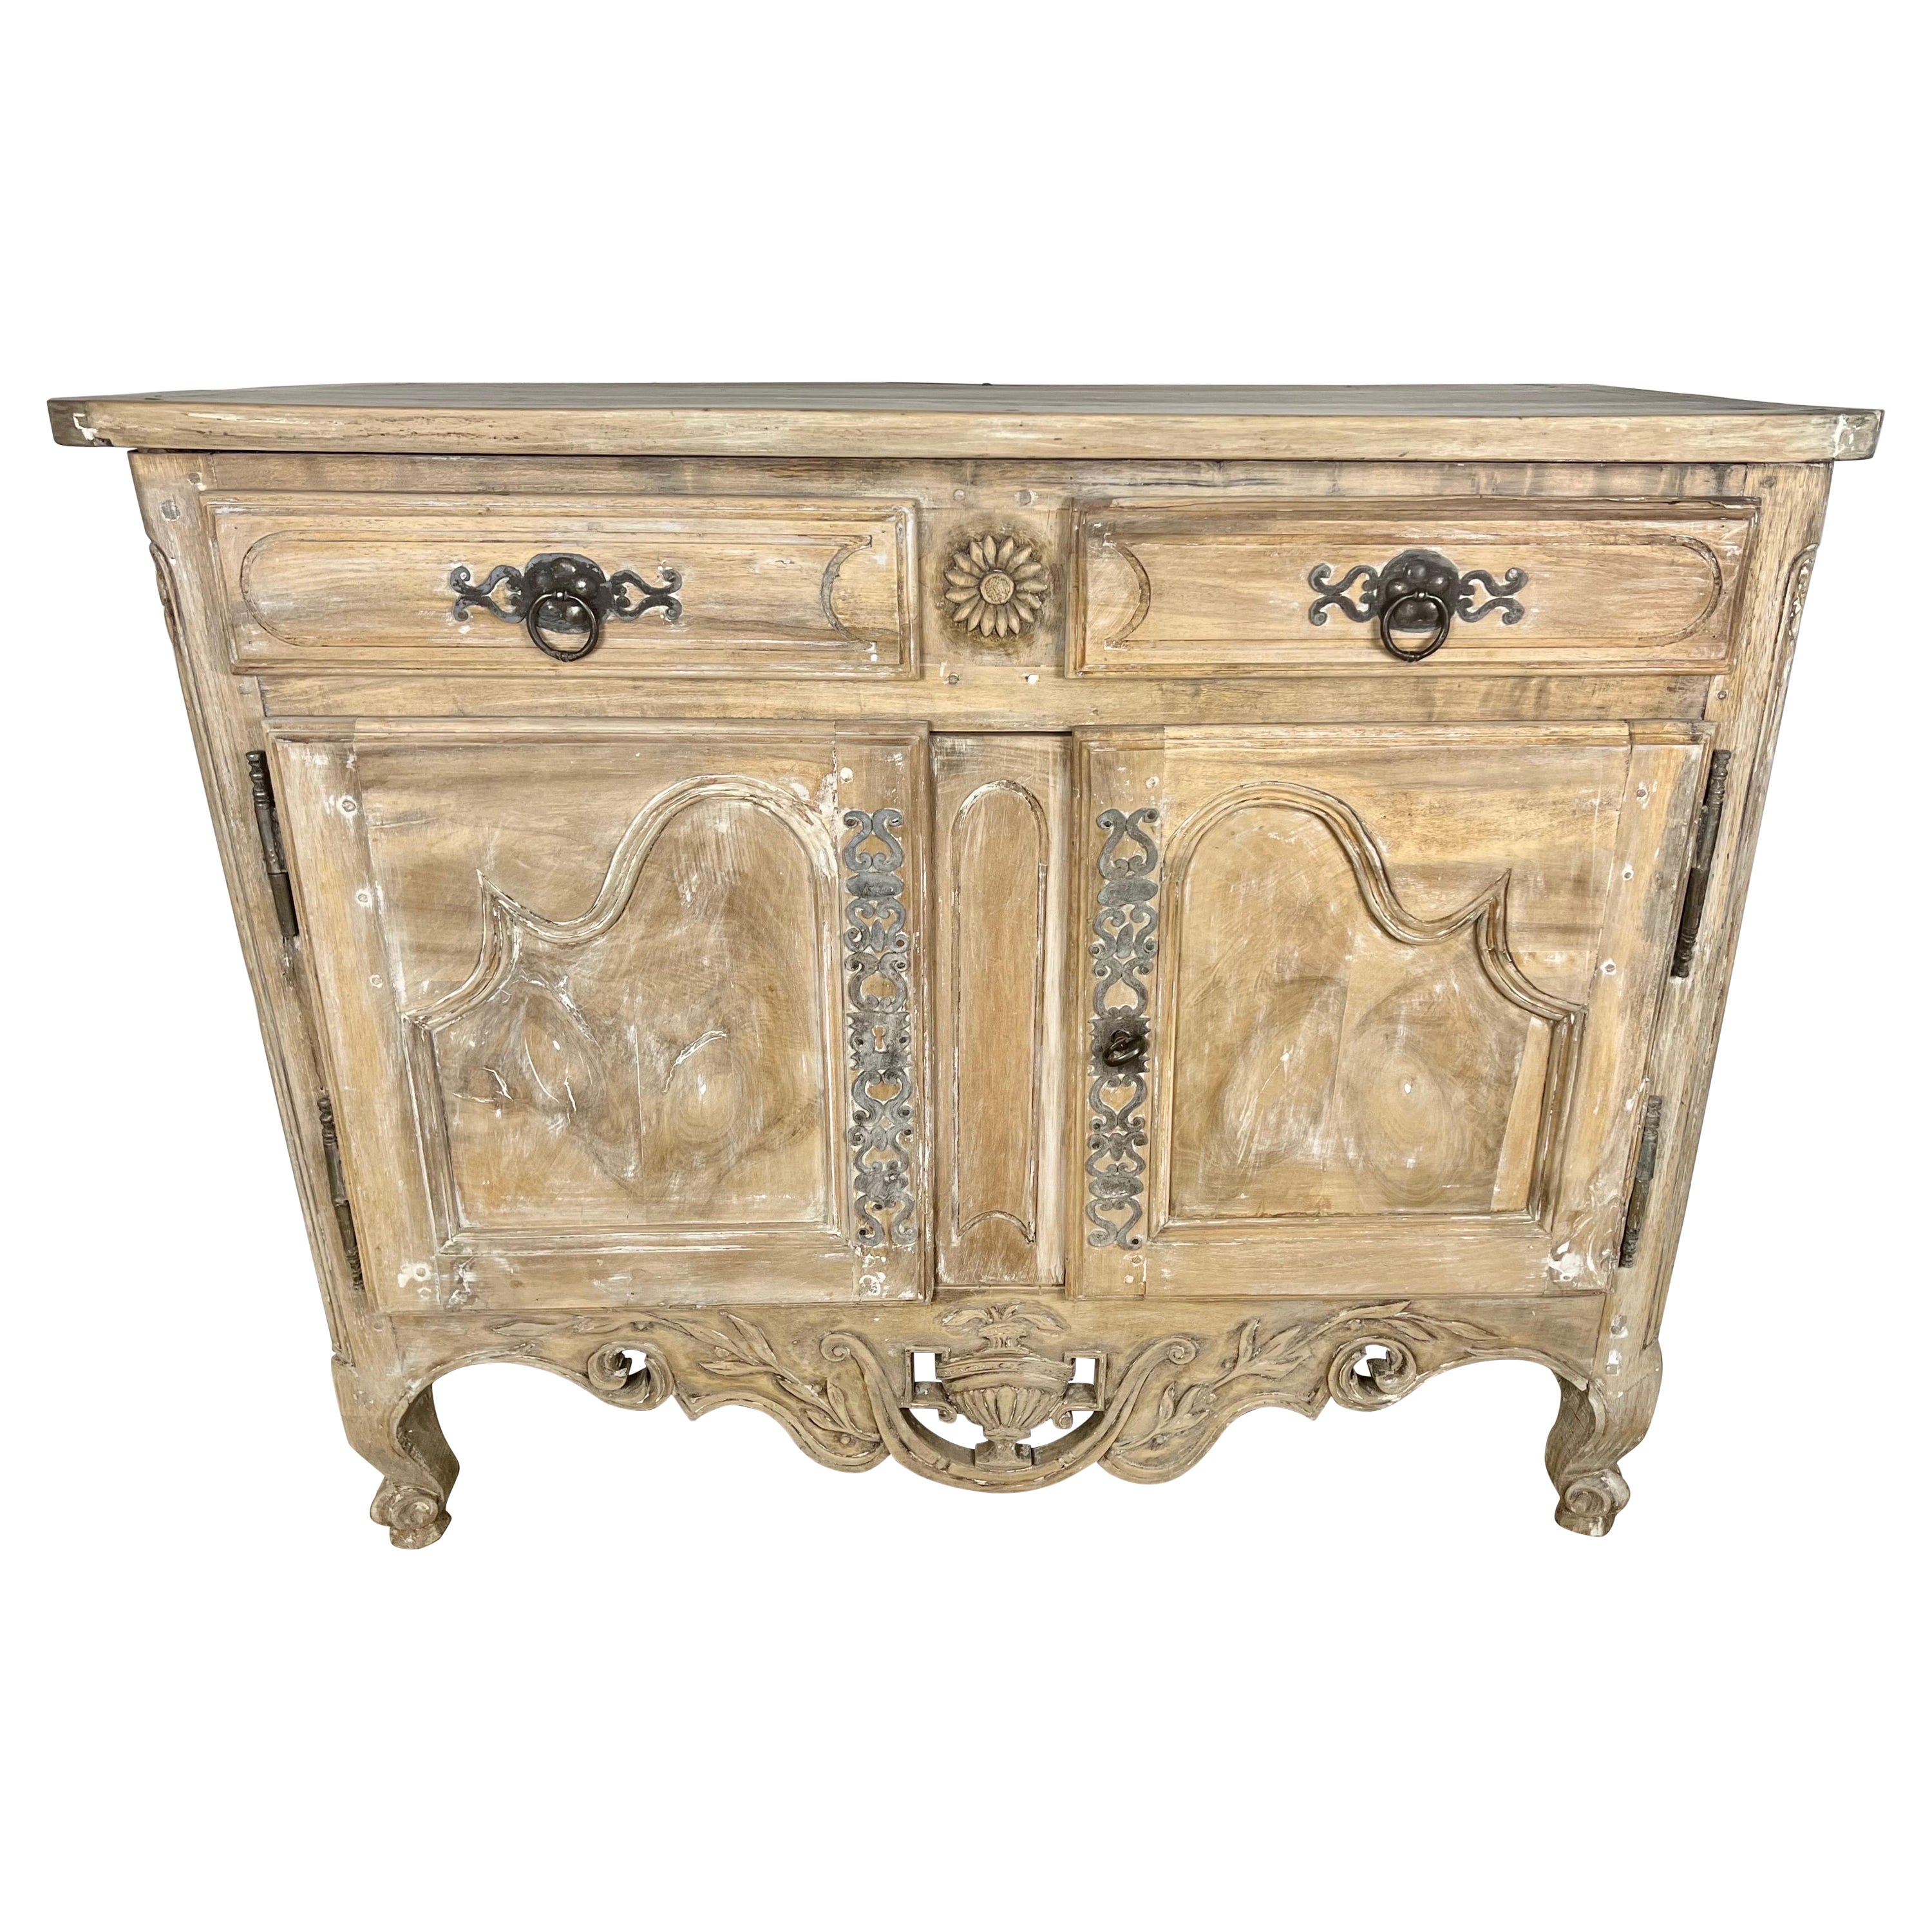 18th C. French Carved Buffet with Distressed Painted Finish